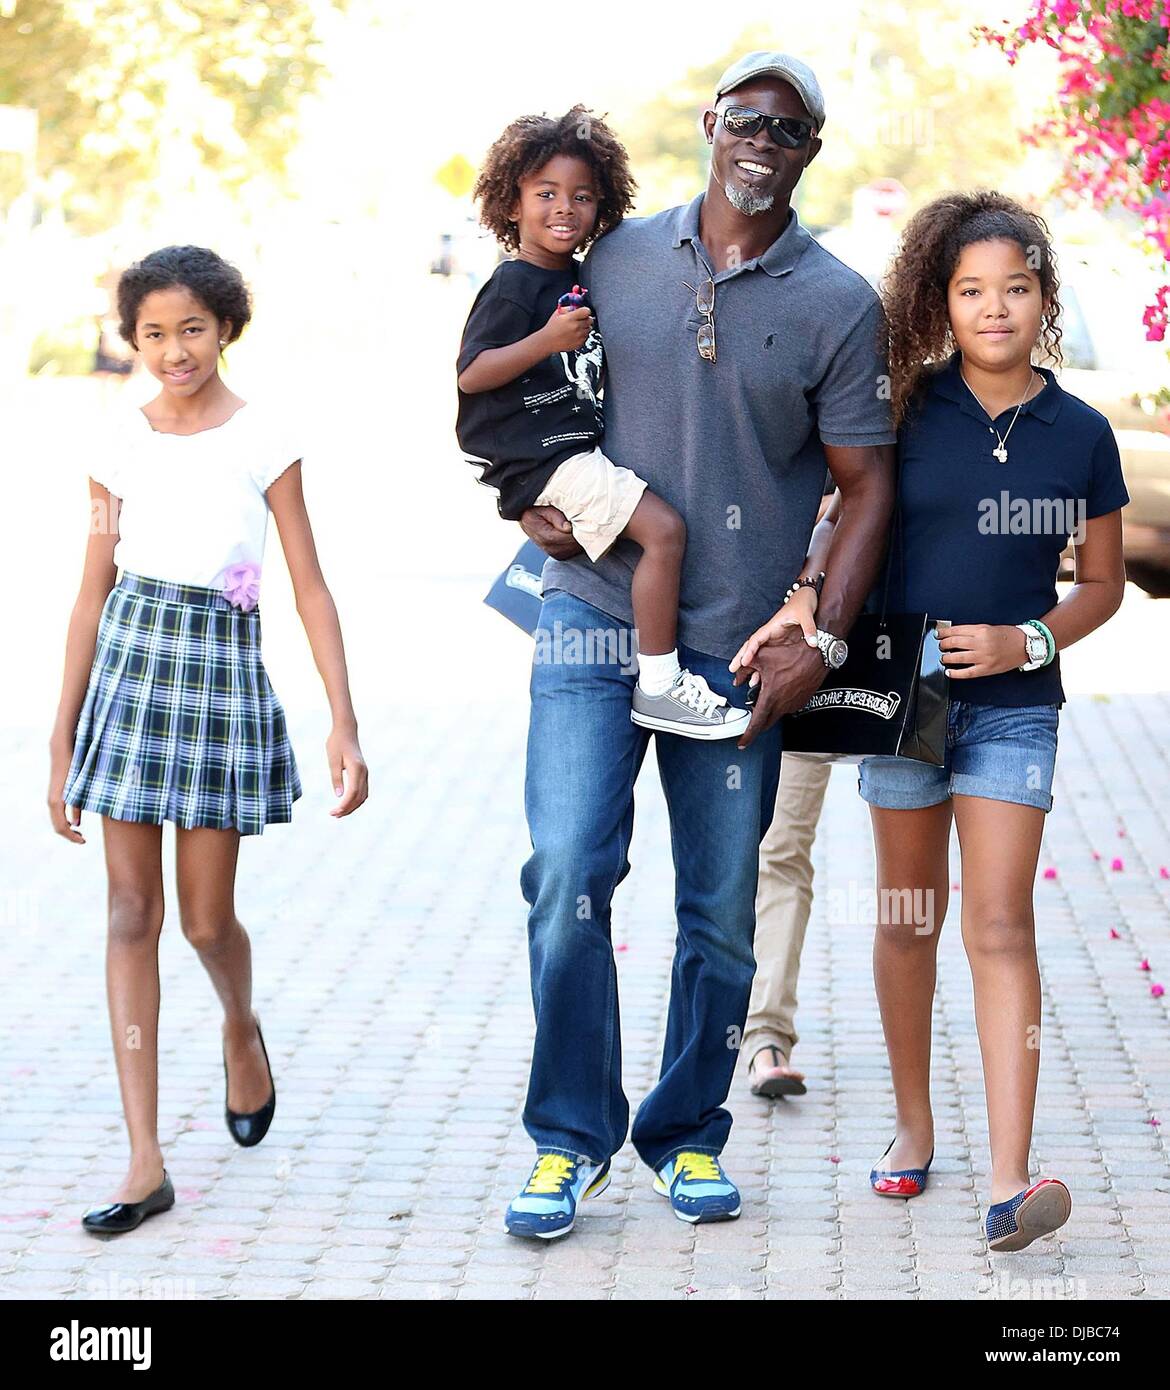 Kenzo Lee Hounsou, Djimon Hounsou, Ming Lee Simmons and Aoki Lee Simmons Djimon Hounsou at the Malibu Country Mart with his stepdaughters and son Los Angeles, California - 15.09.12 Stock Photo